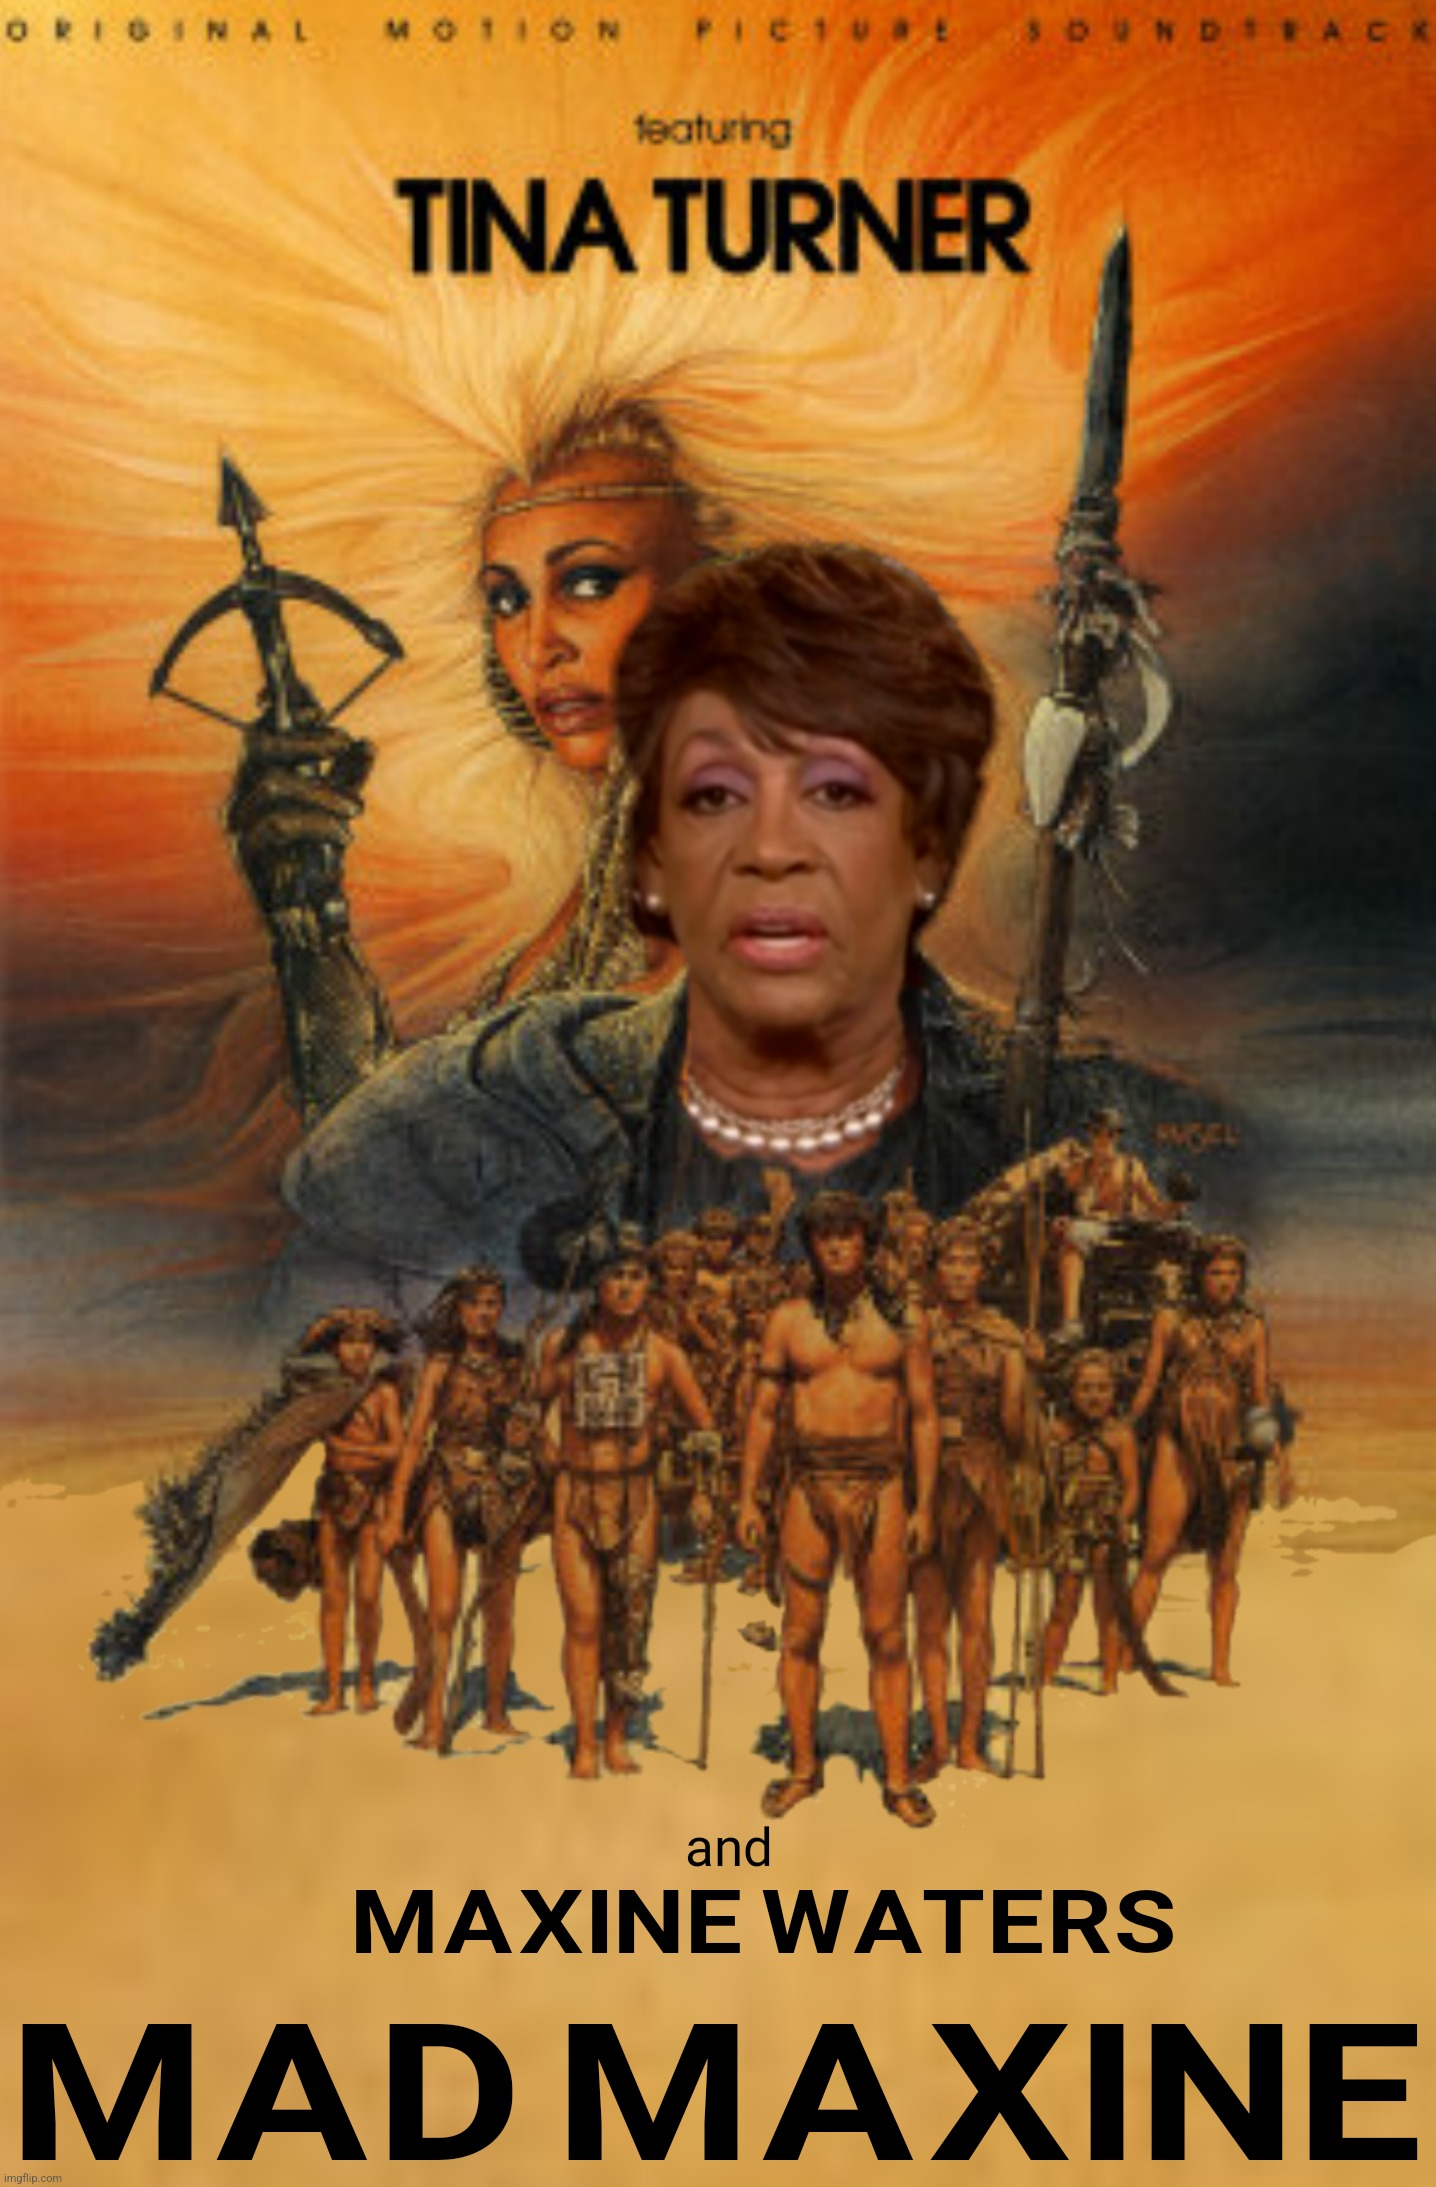 We Don't Need Another Zero | image tagged in bad photoshop,maxine waters,mad max,tina turner,maxinsurrection | made w/ Imgflip meme maker